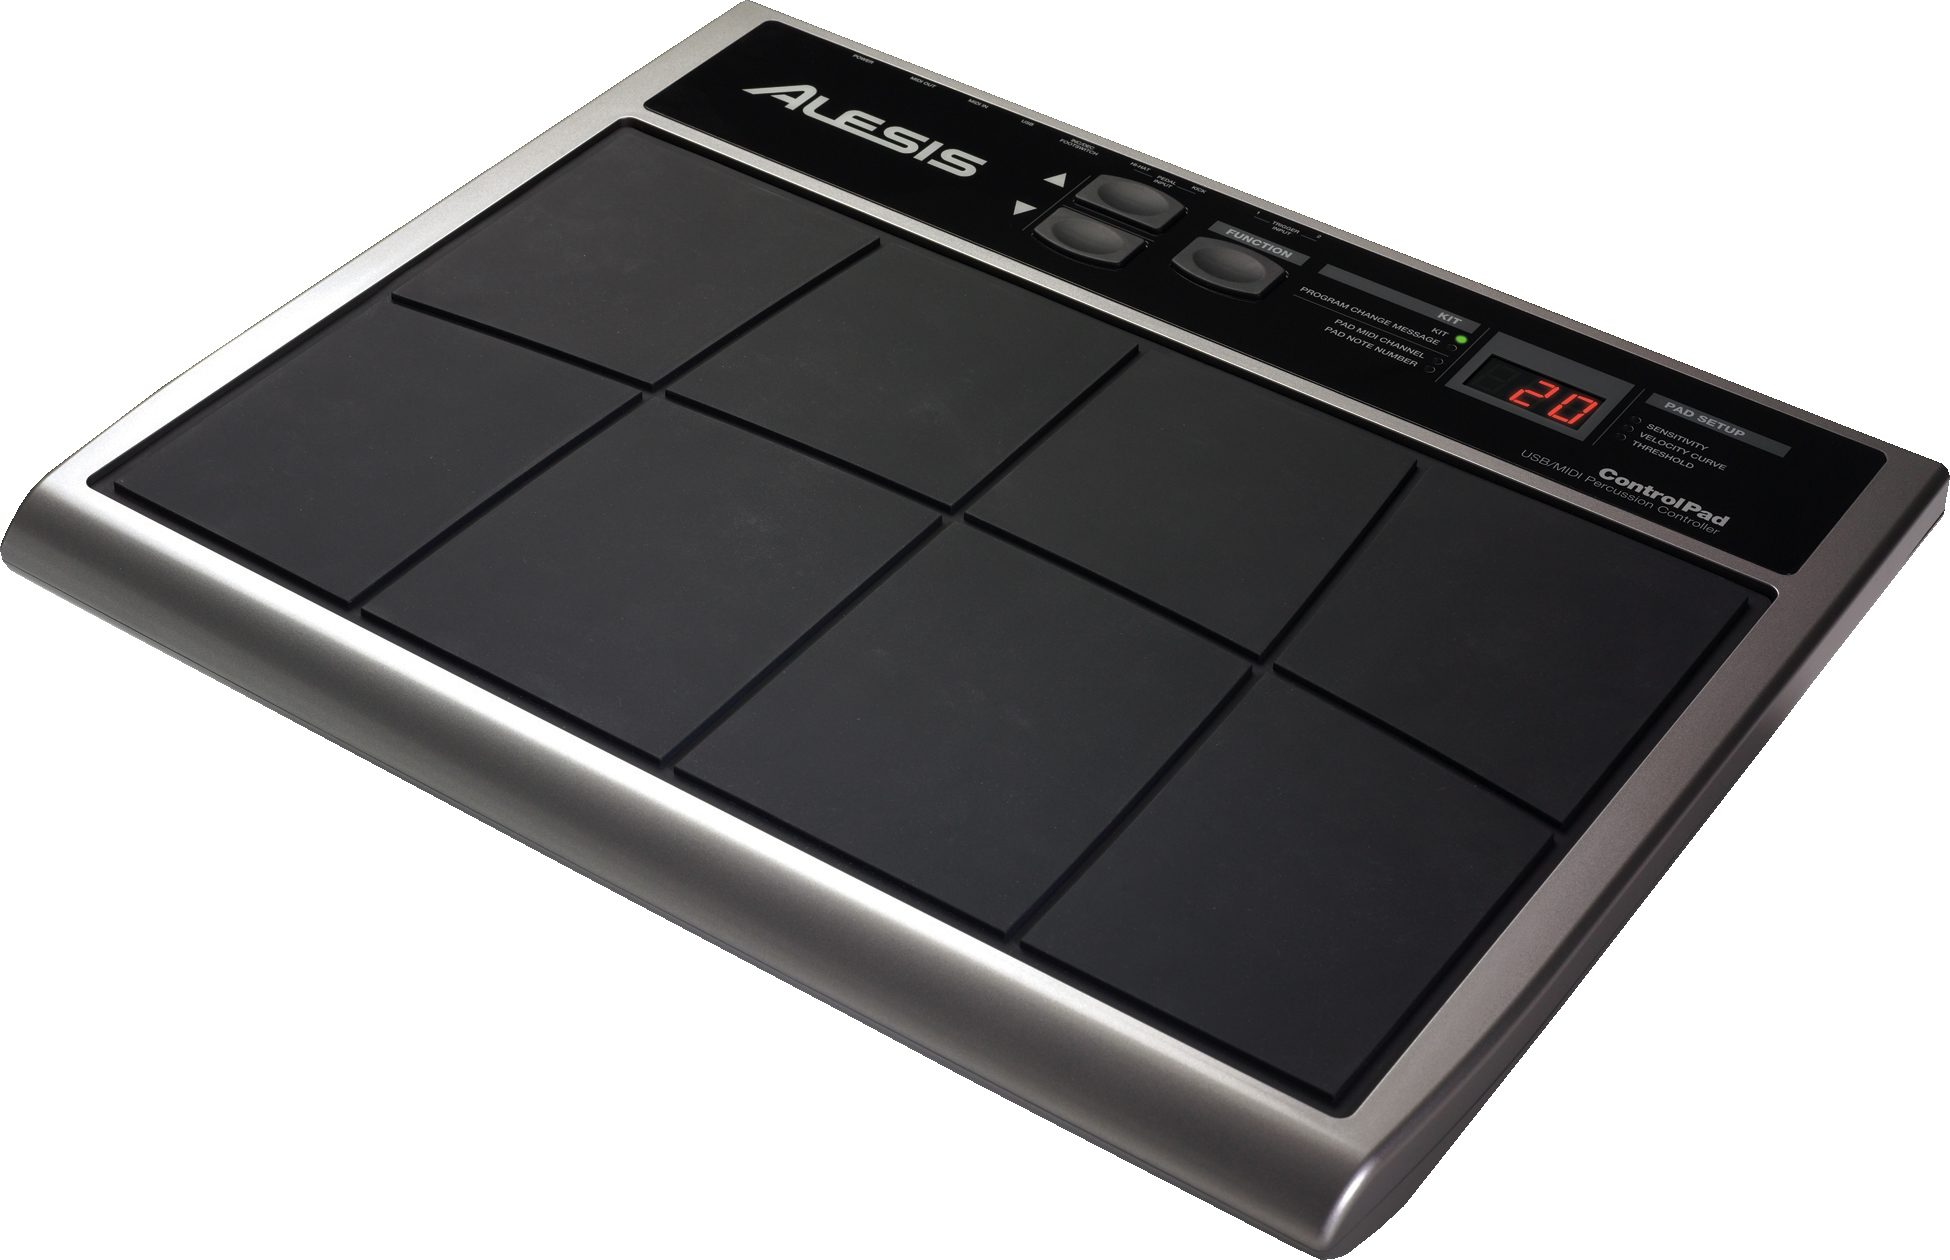 Exclamation point Eyesight Sportsman Alesis Control Pad, USB/MIDI Drum Controller | zZounds